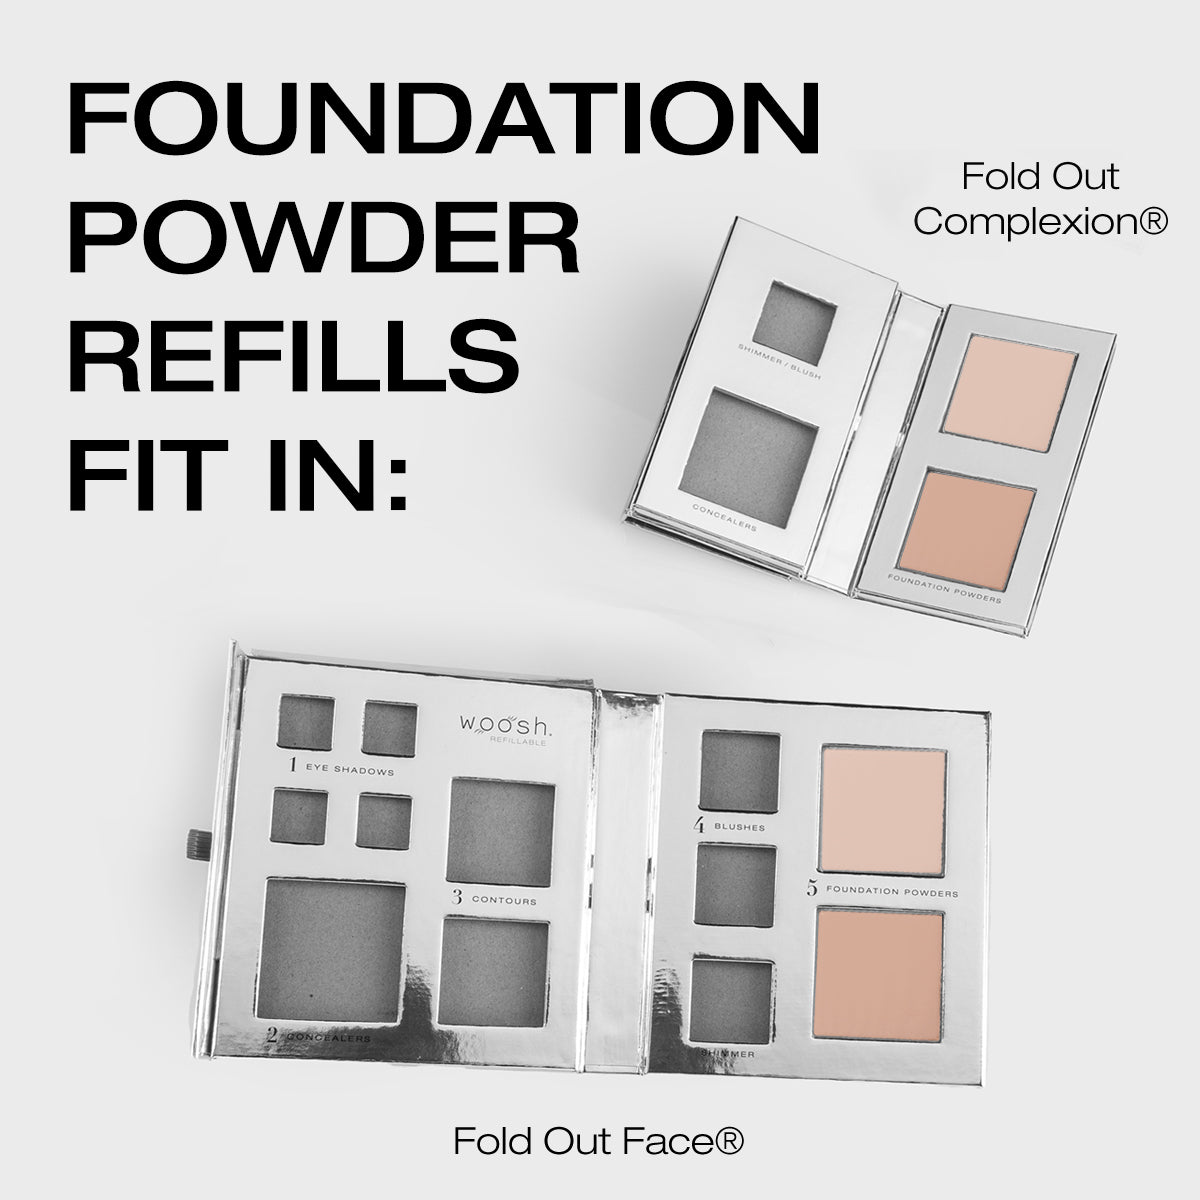 Foundation powder refills fit in the fold out complexion and fold out face 